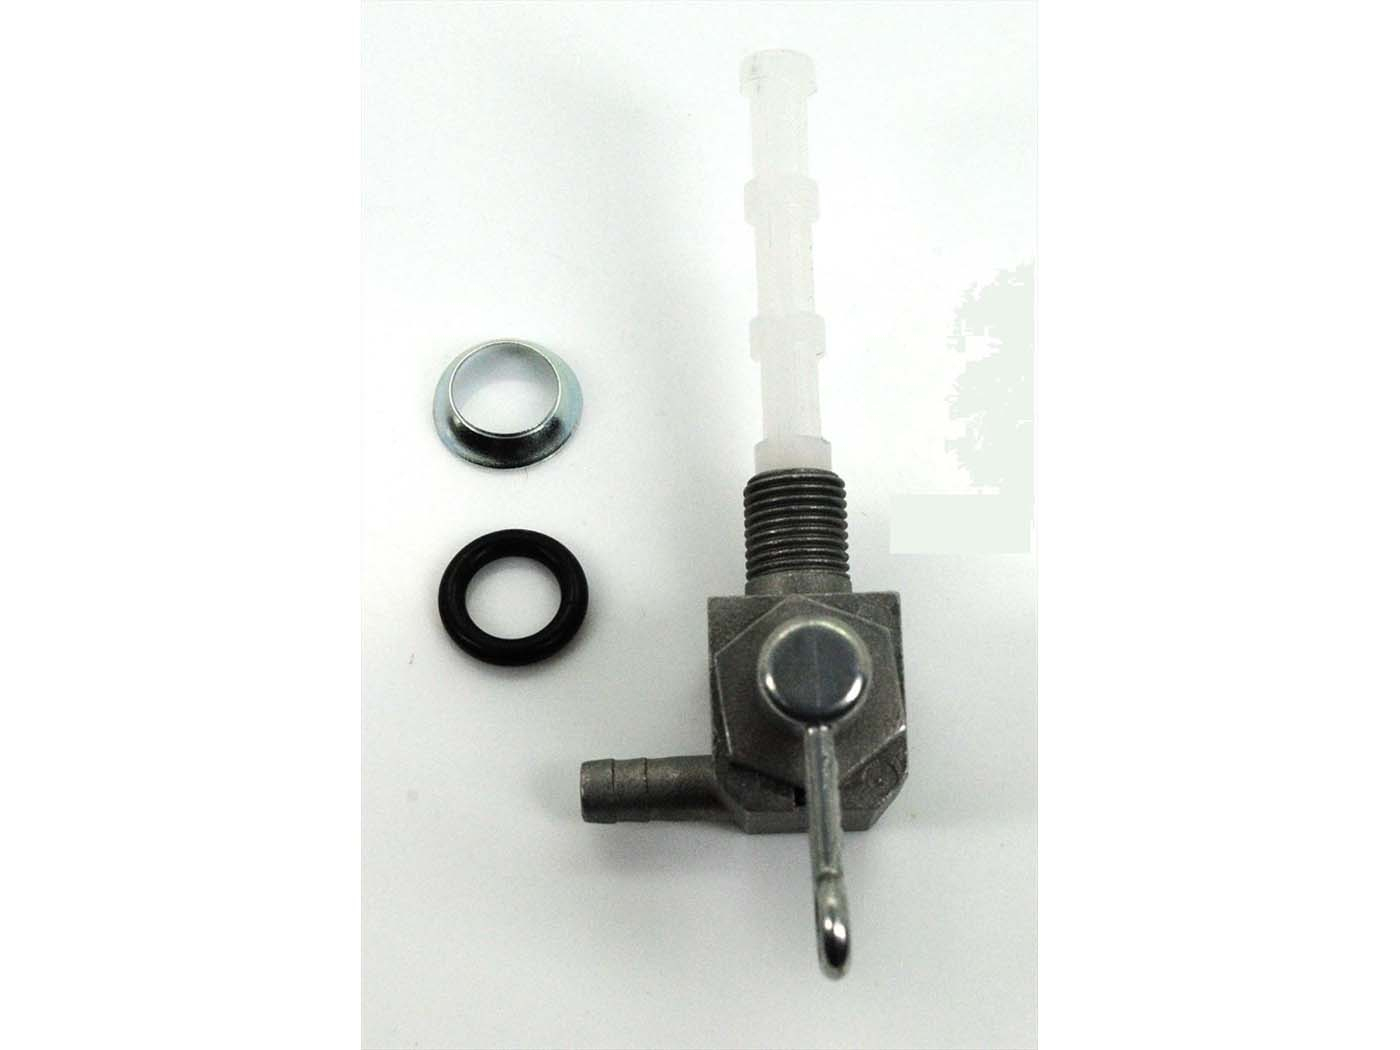 Fuel Tap, Original For Tomos A 3 35 Moped, Mobylette Peugeot